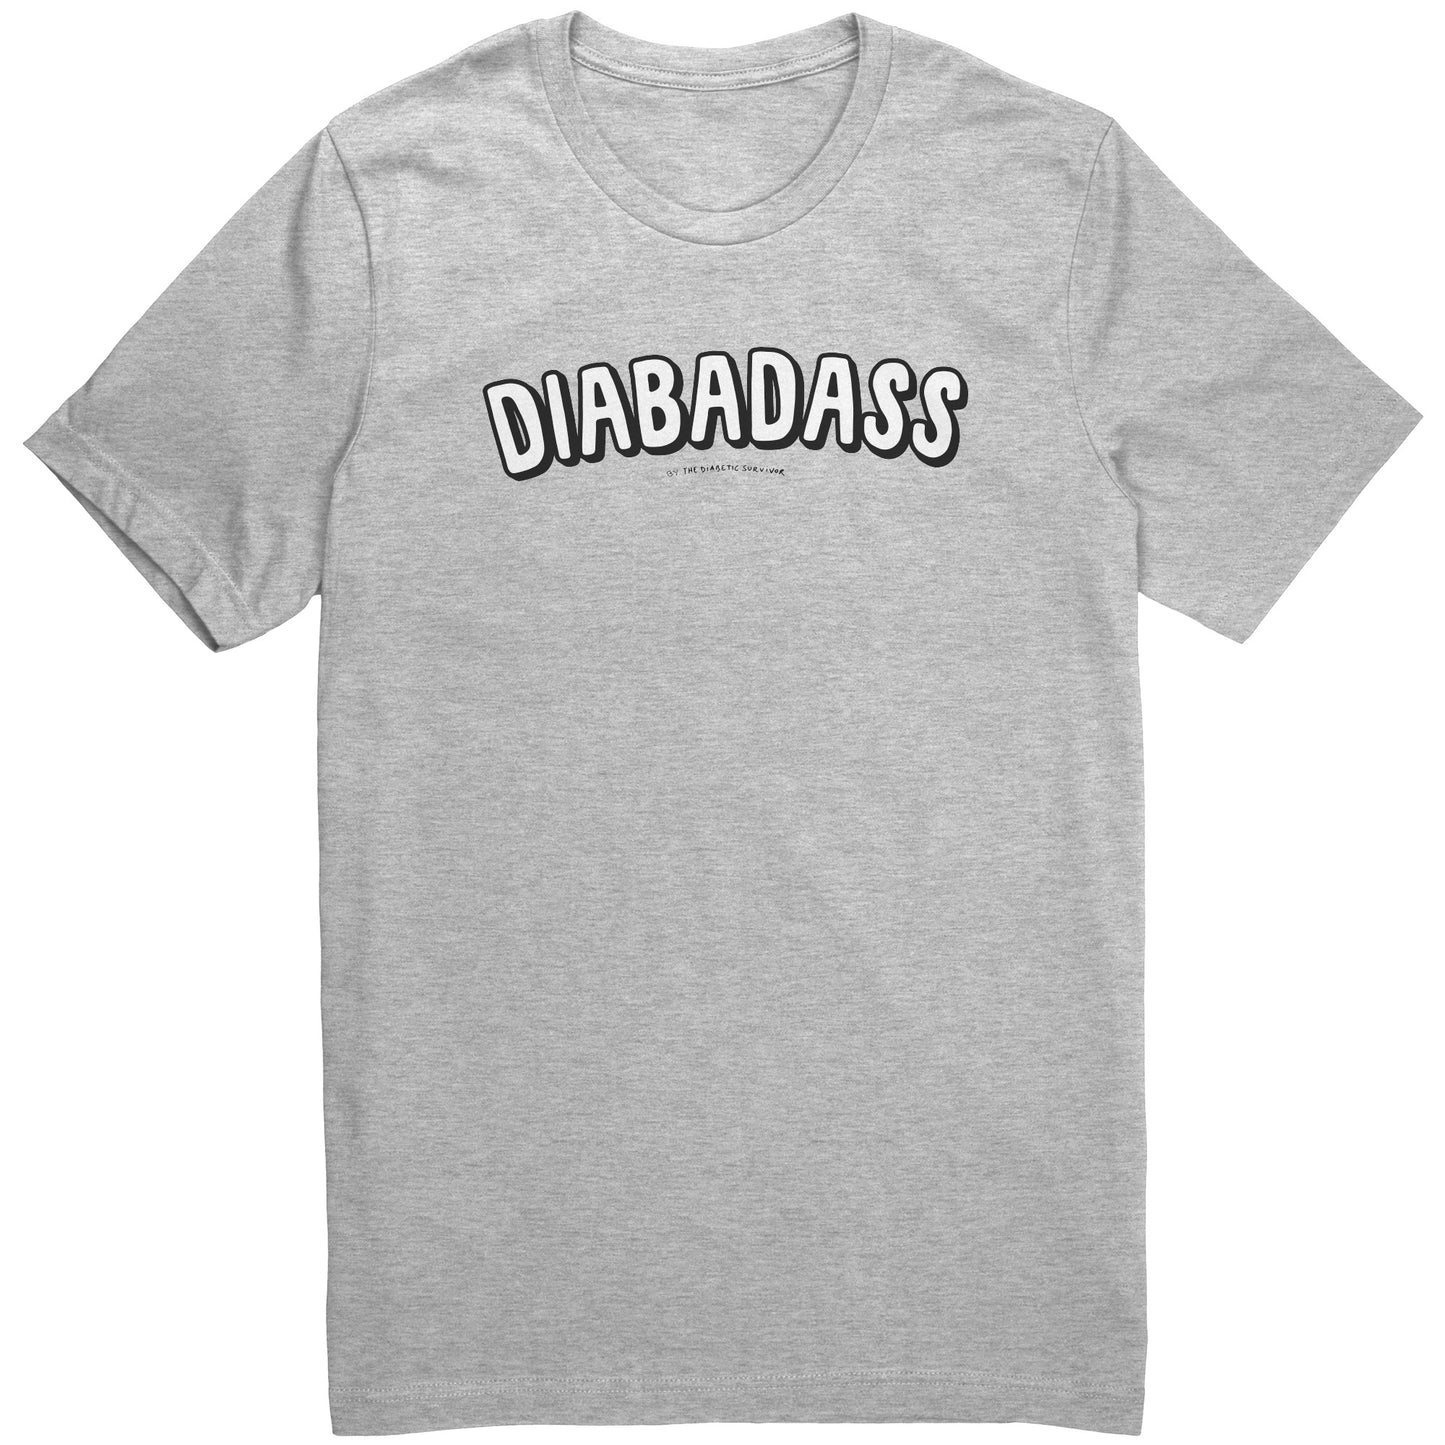 A diabadass t-shirt for a diabadass is a person with diabetes who is also hardcore badass 